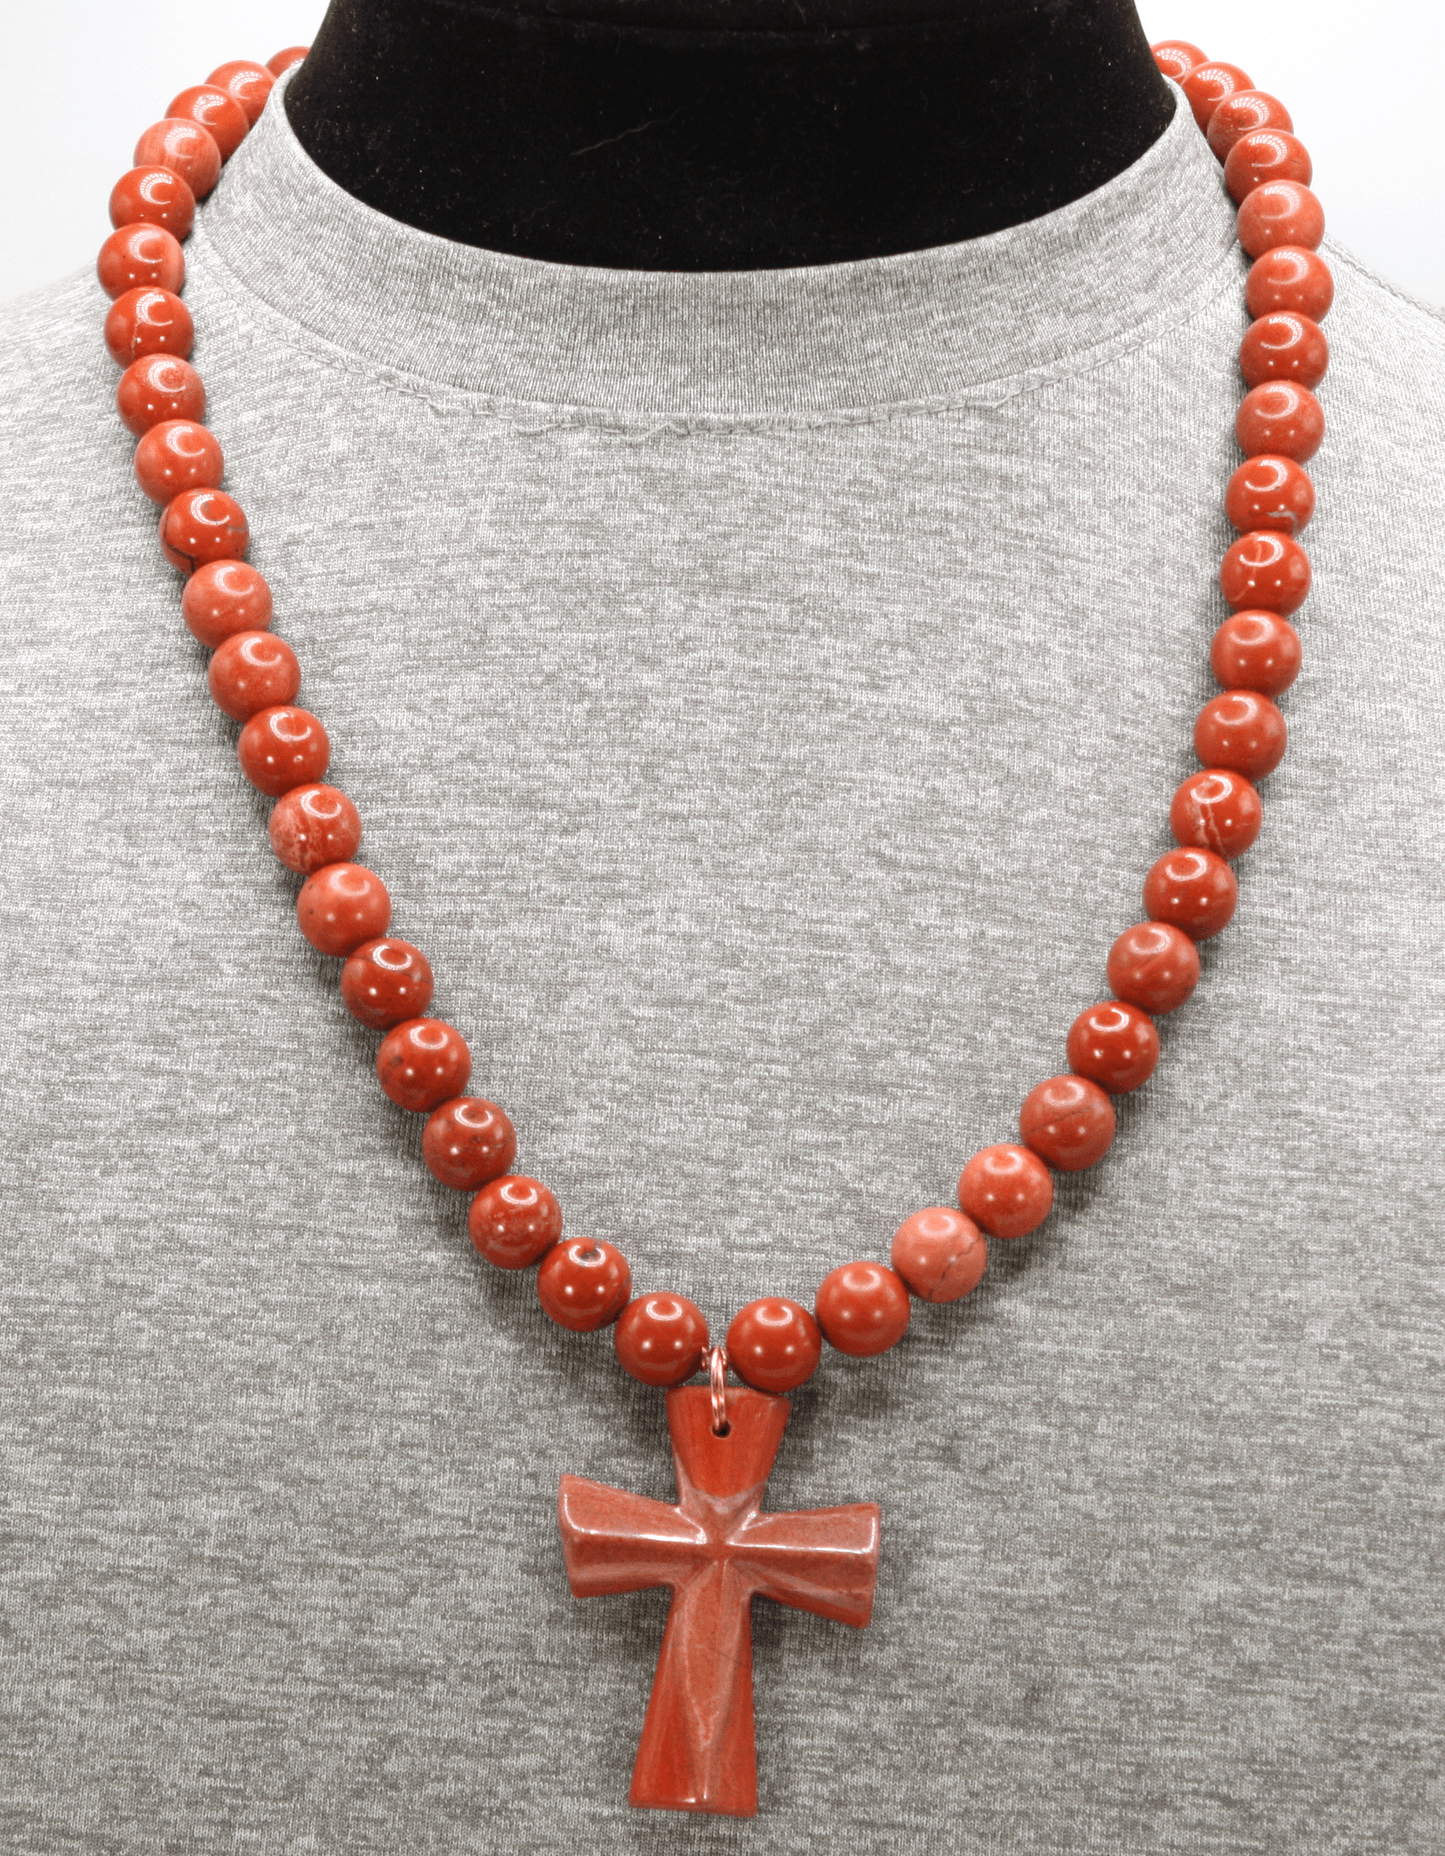 Genuine Red Jasper Necklace with Red Jasper Cross - Gift for Men/Woman - Spiritual Accessories - Religious Symbol